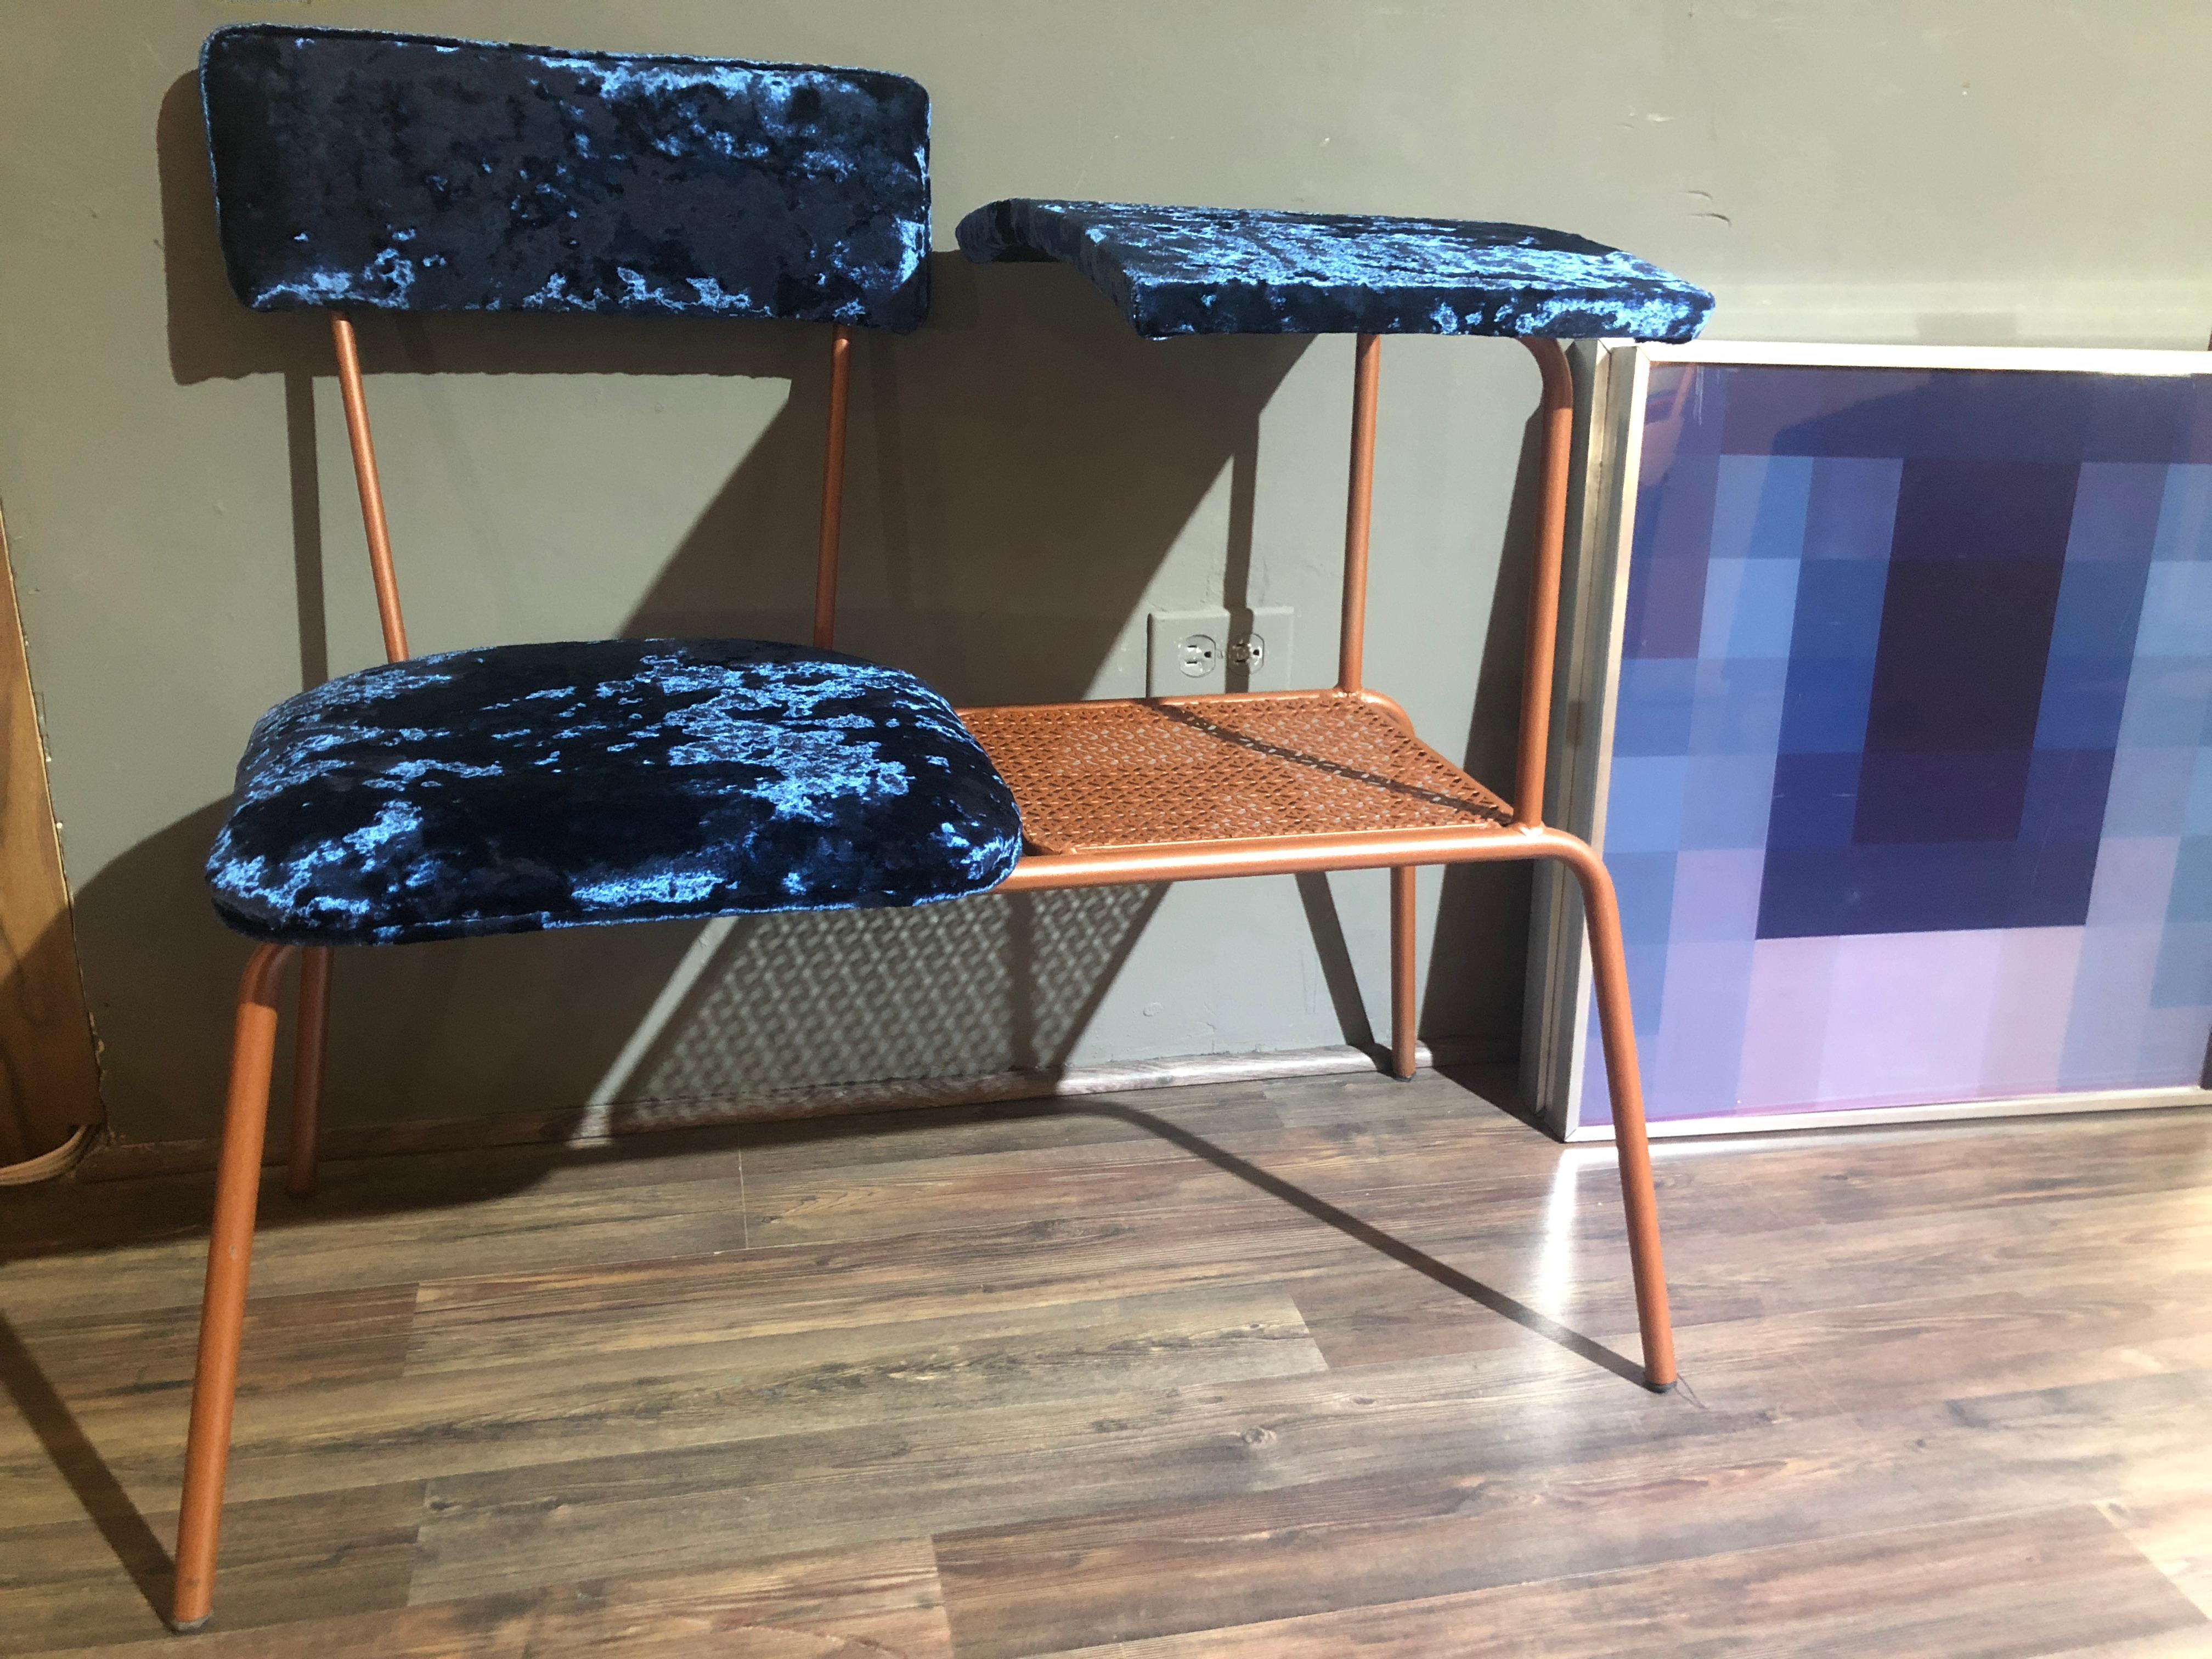 For your consideration this beautiful telephone bench of the 1960s, designed for a small space that will make it something spacious, restored piece and where we use a good quality fabric.